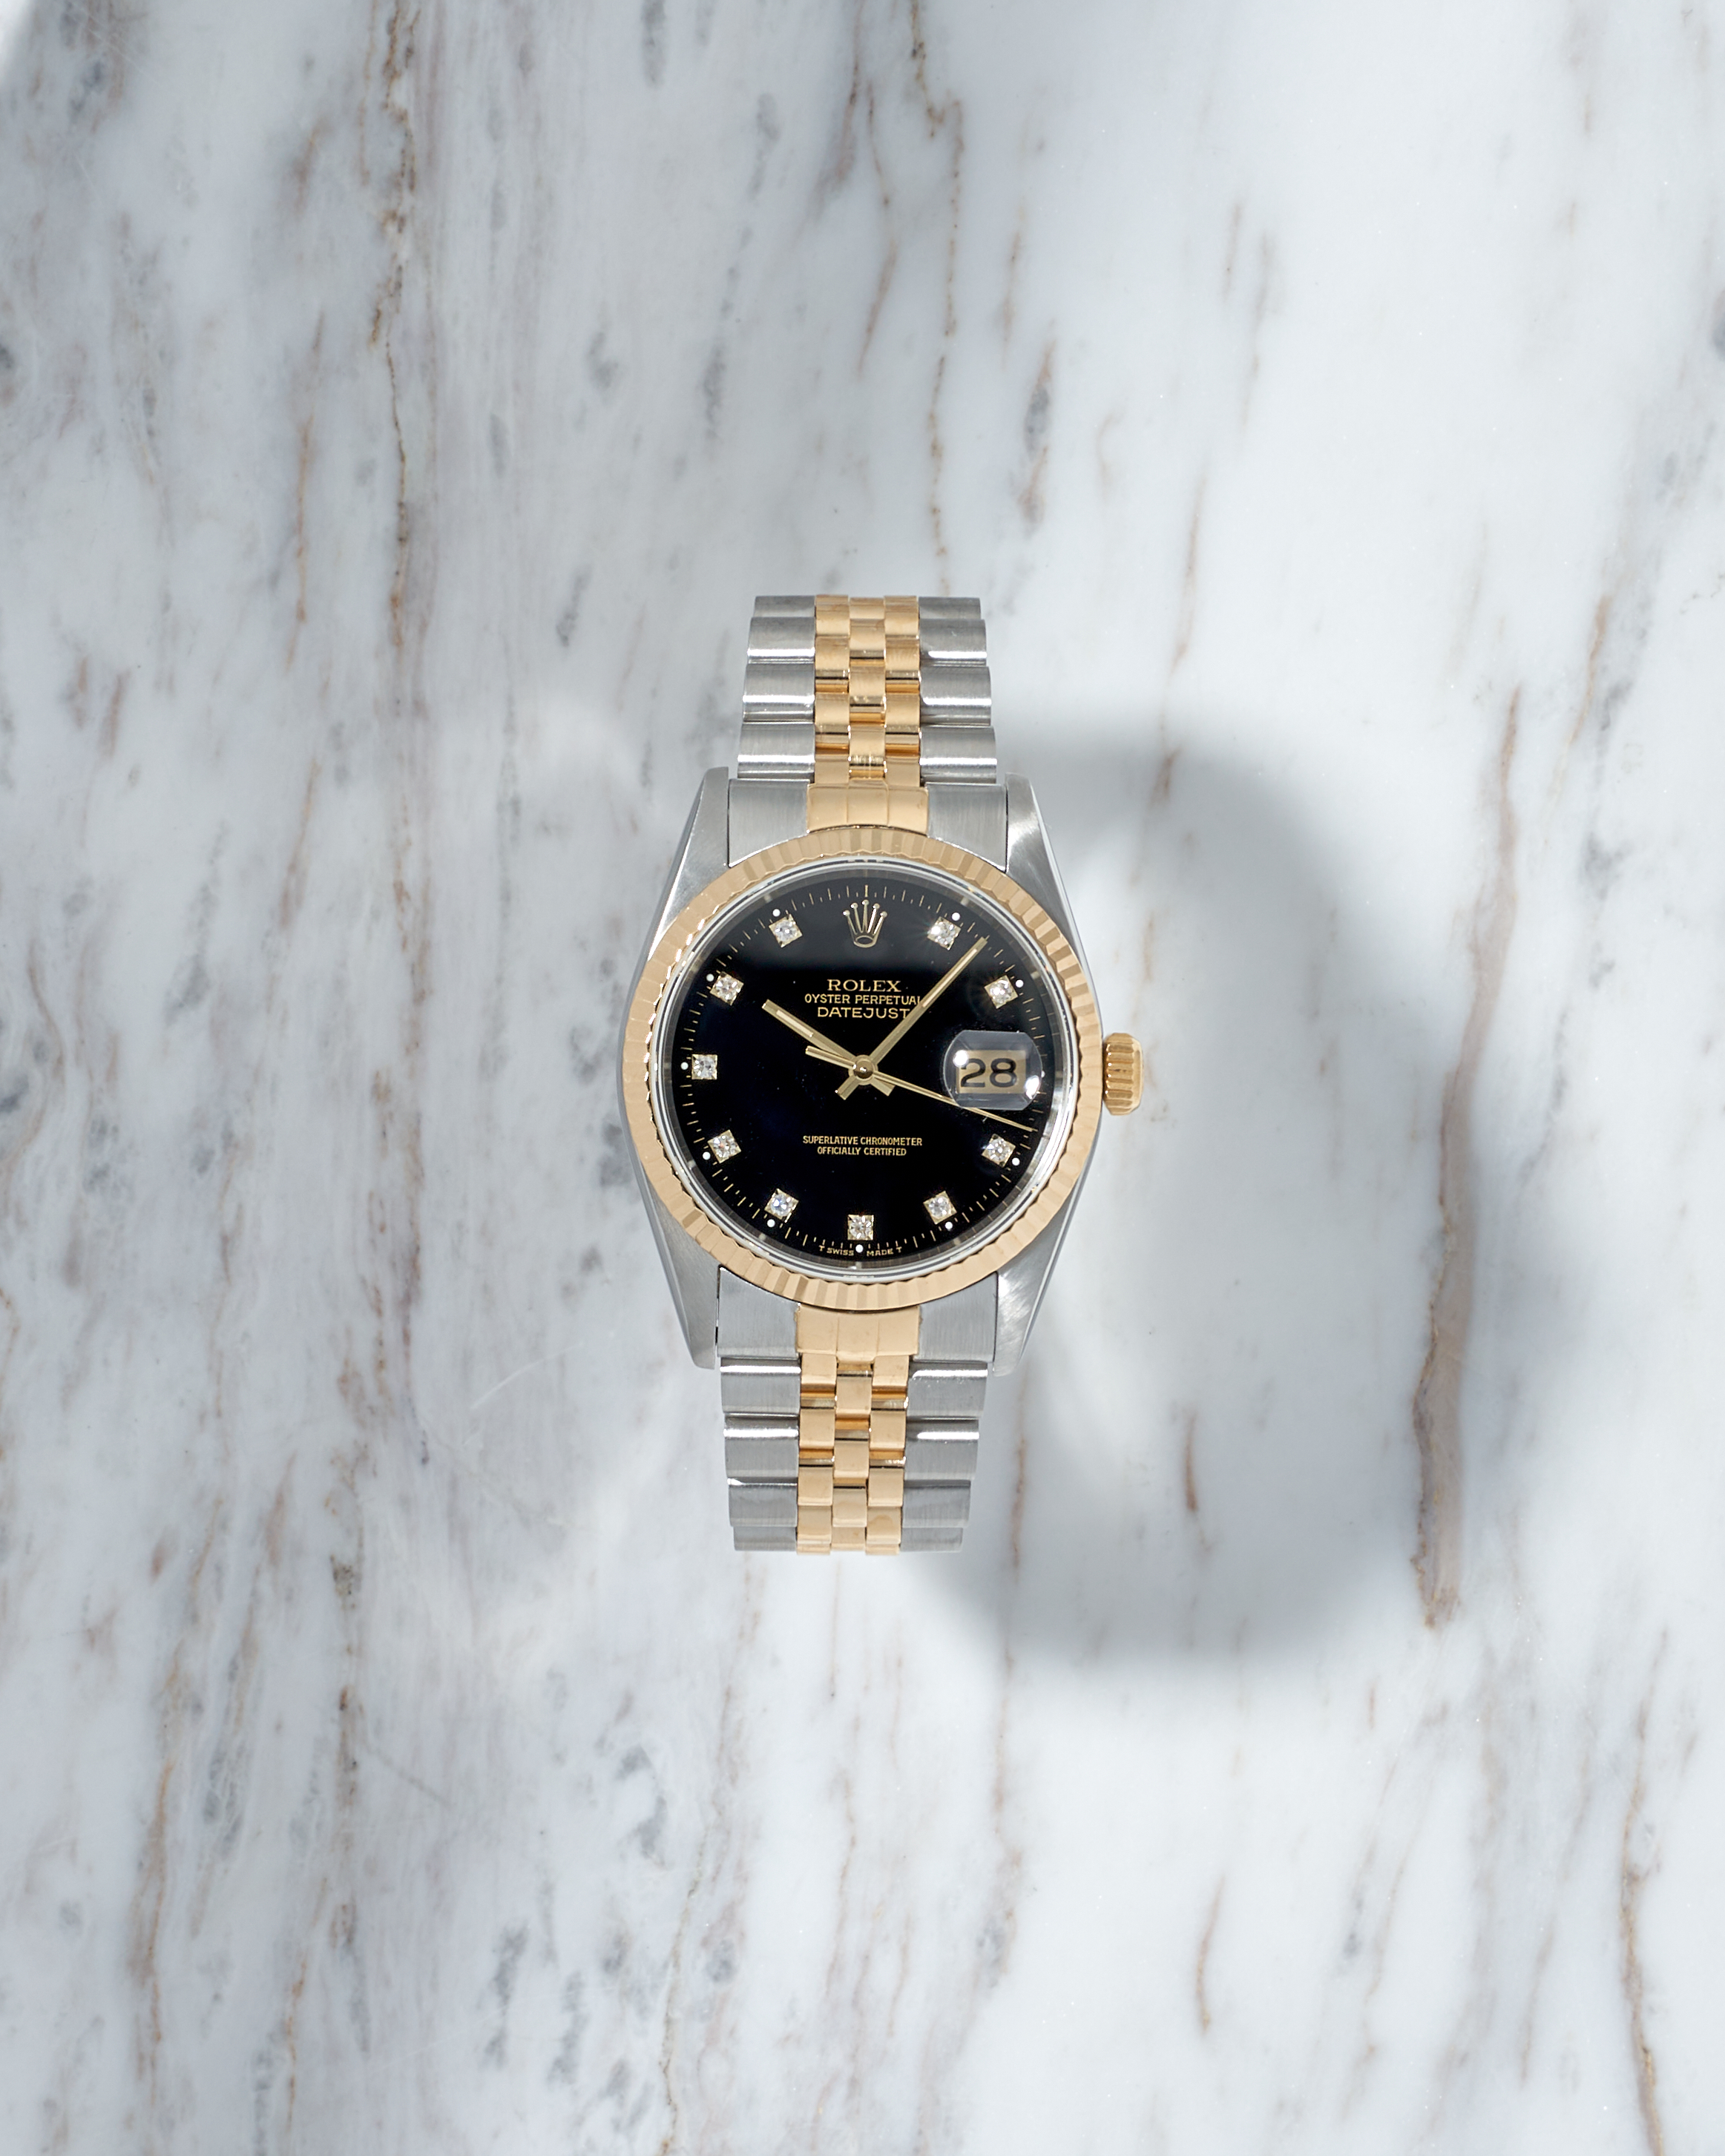 Rolex Datejust 36mm Black Dial with Diamonds S Series